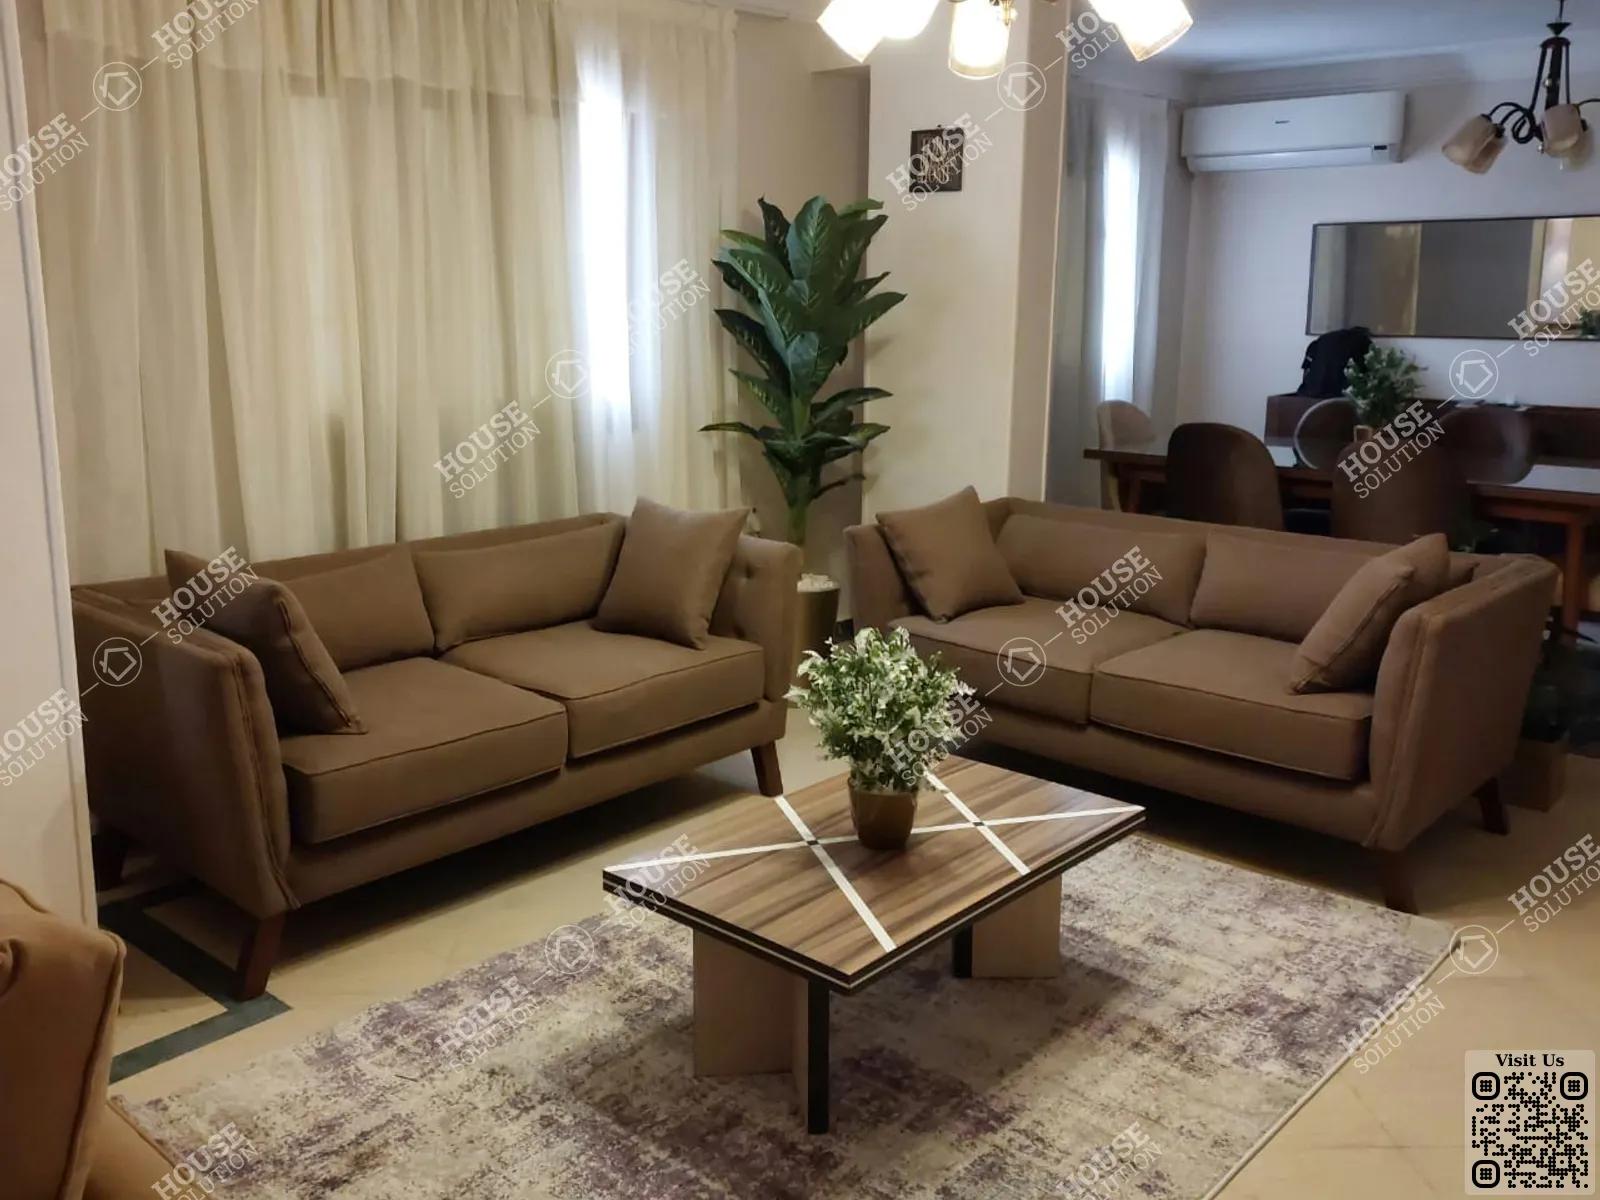 RECEPTION  @ Apartments For Rent In Maadi New Maadi Area: 185 m² consists of 3 Bedrooms 2 Bathrooms Modern furnished 5 stars #5826-0